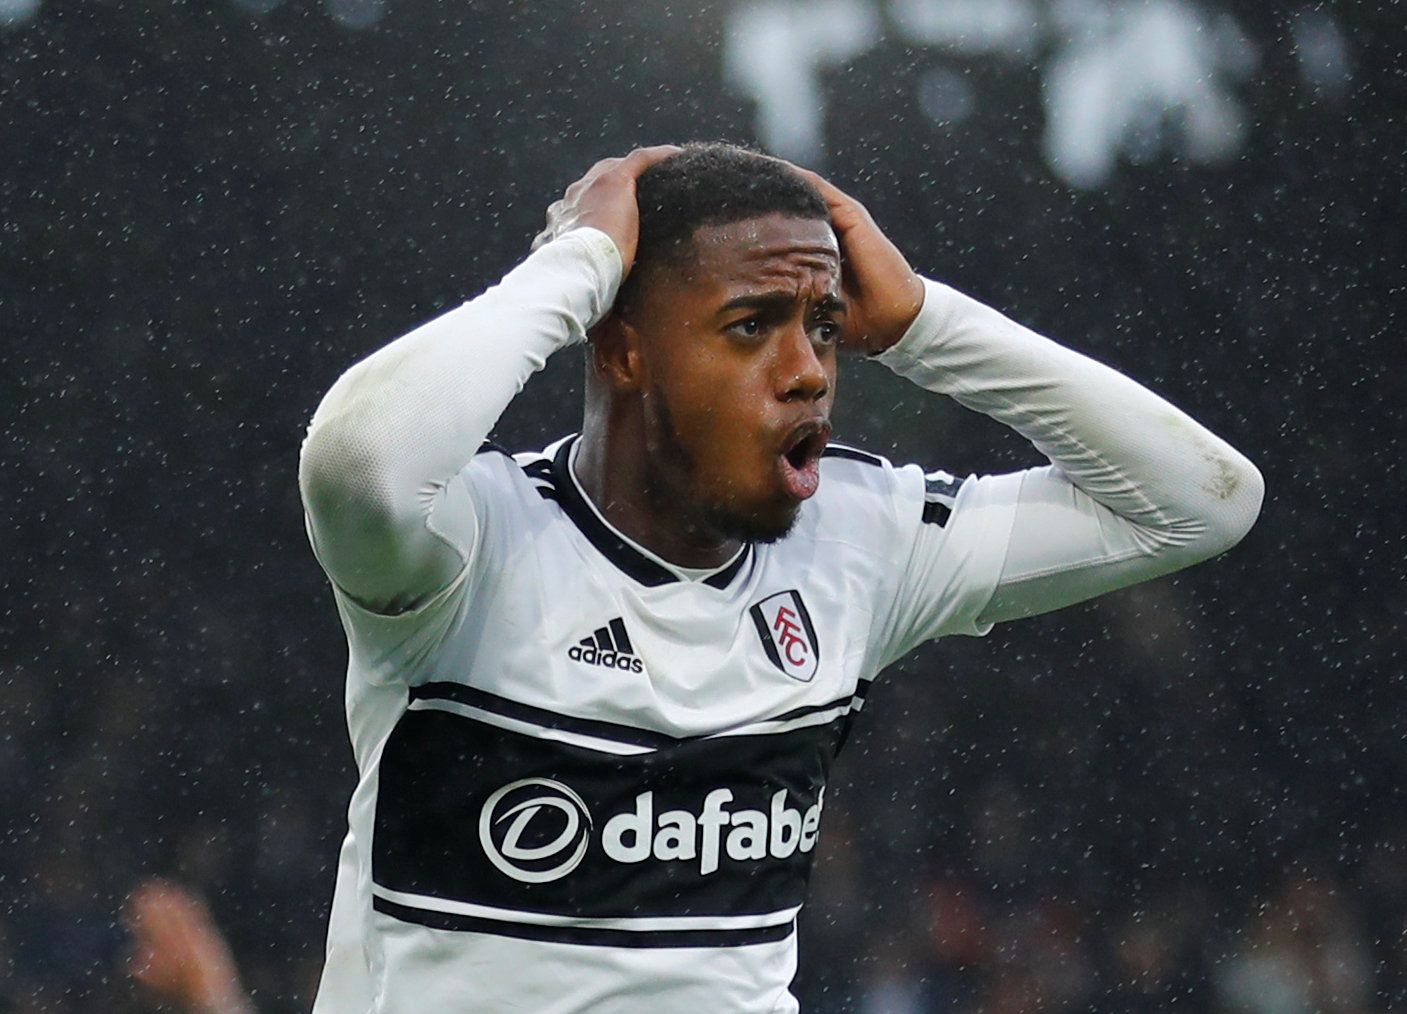 Soccer Football - Premier League - Fulham v Chelsea - Craven Cottage, London, Britain - March 3, 2019  Fulham's Ryan Sessegnon reacts after scoring a disallowed goal                      REUTERS/Eddie Keogh  EDITORIAL USE ONLY. No use with unauthorized audio, video, data, fixture lists, club/league logos or "live" services. Online in-match use limited to 75 images, no video emulation. No use in betting, games or single club/league/player publications.  Please contact your account representative 